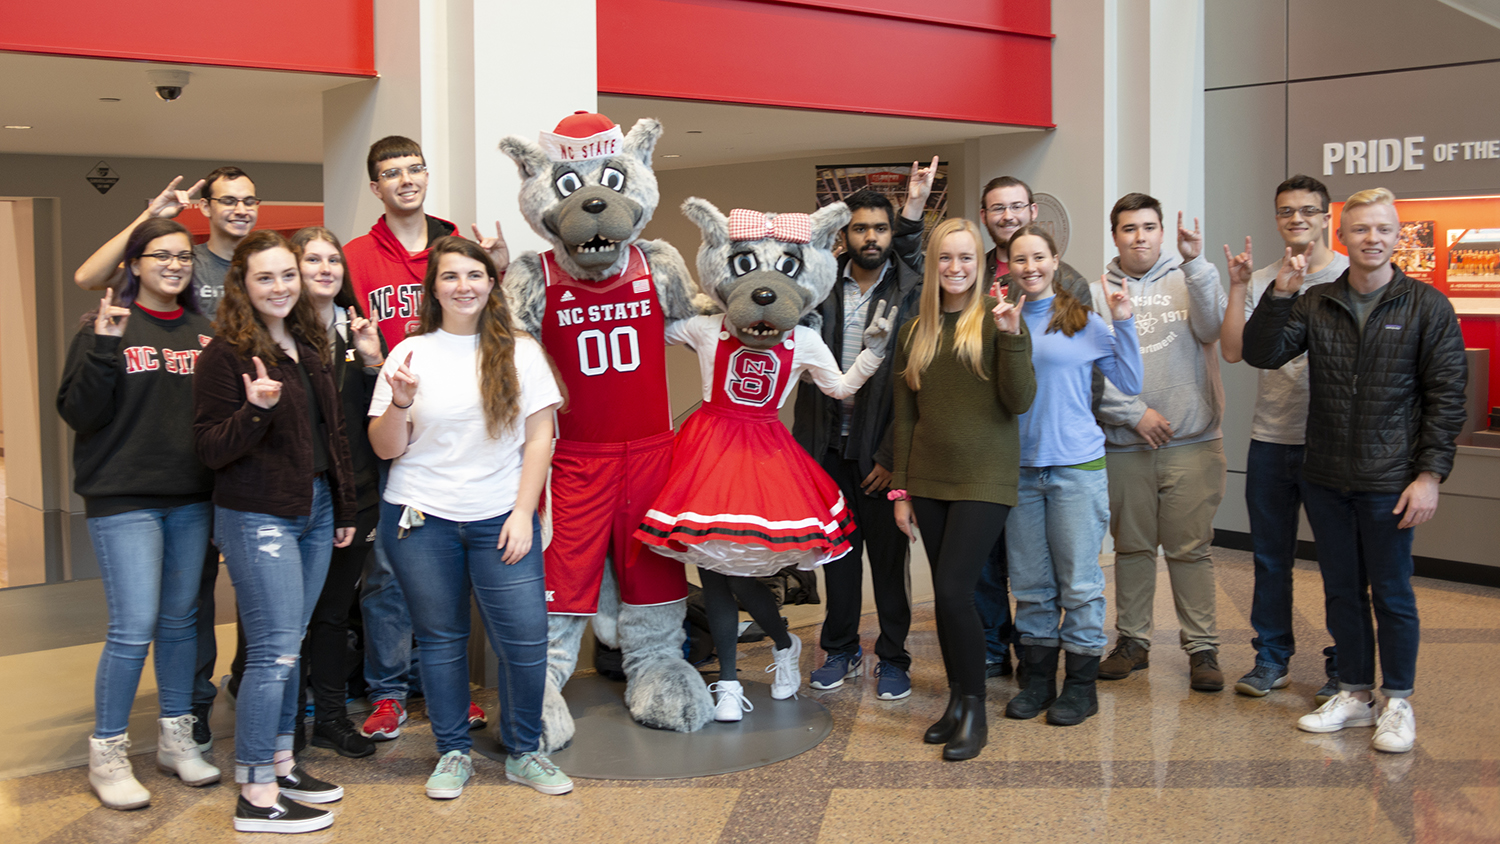 The Solomon Scholars pose with Mr. and Ms. Wuf inside Reynolds Coliseum